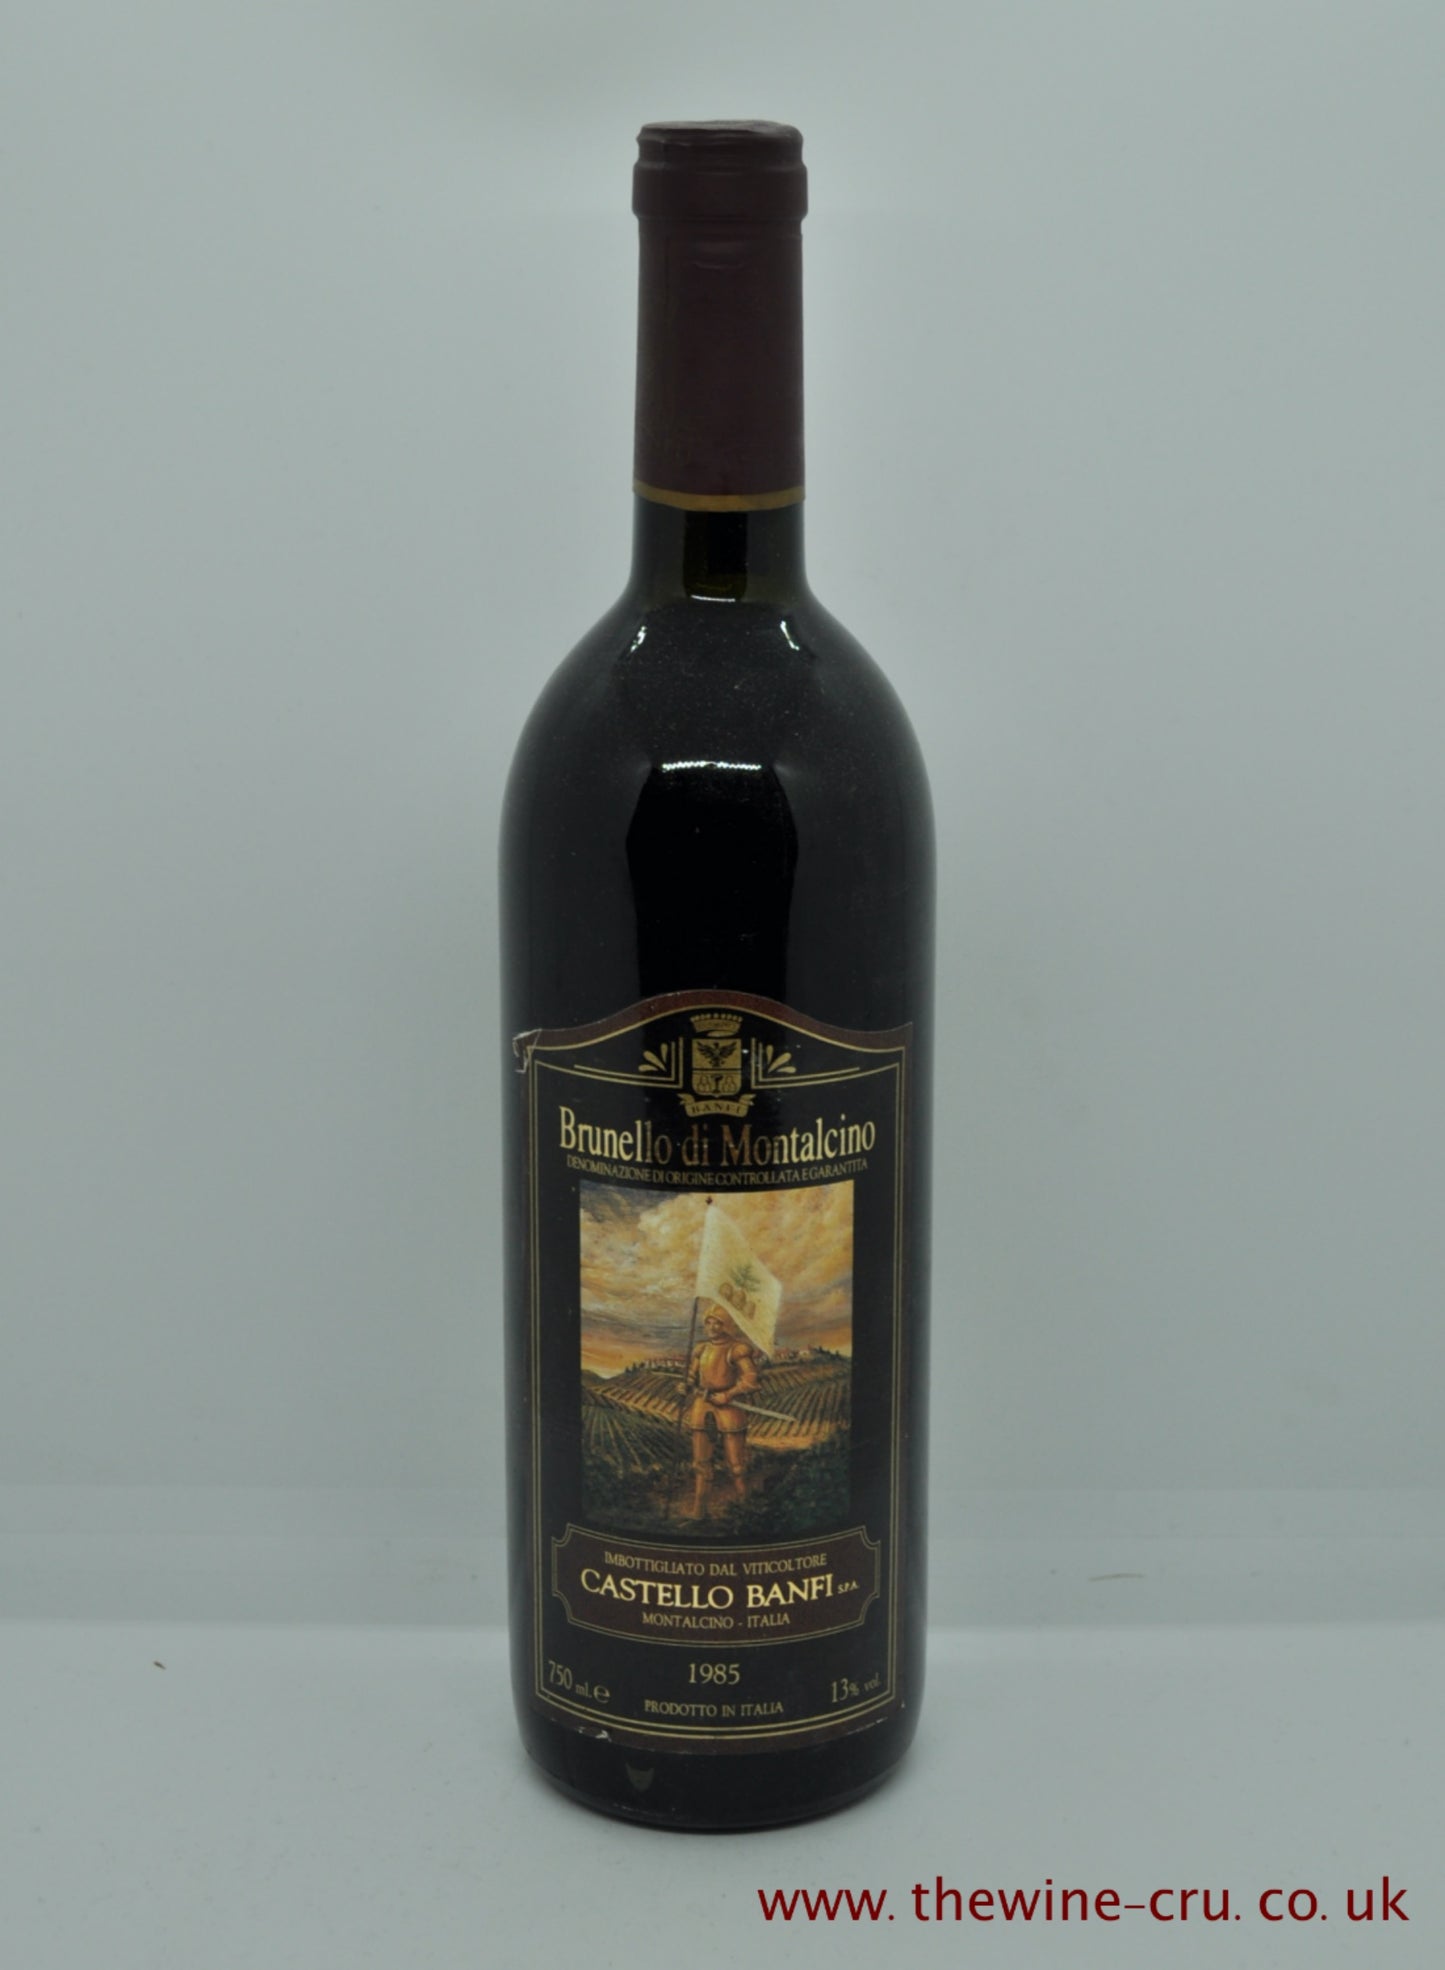 A 1985 vintage red wine. Brunello di Montalcino castello Banfi . Italy. The bootle is in good condition with the wine level being base of neck. Immediate delivery. free local delivery. Gift wrapping available.